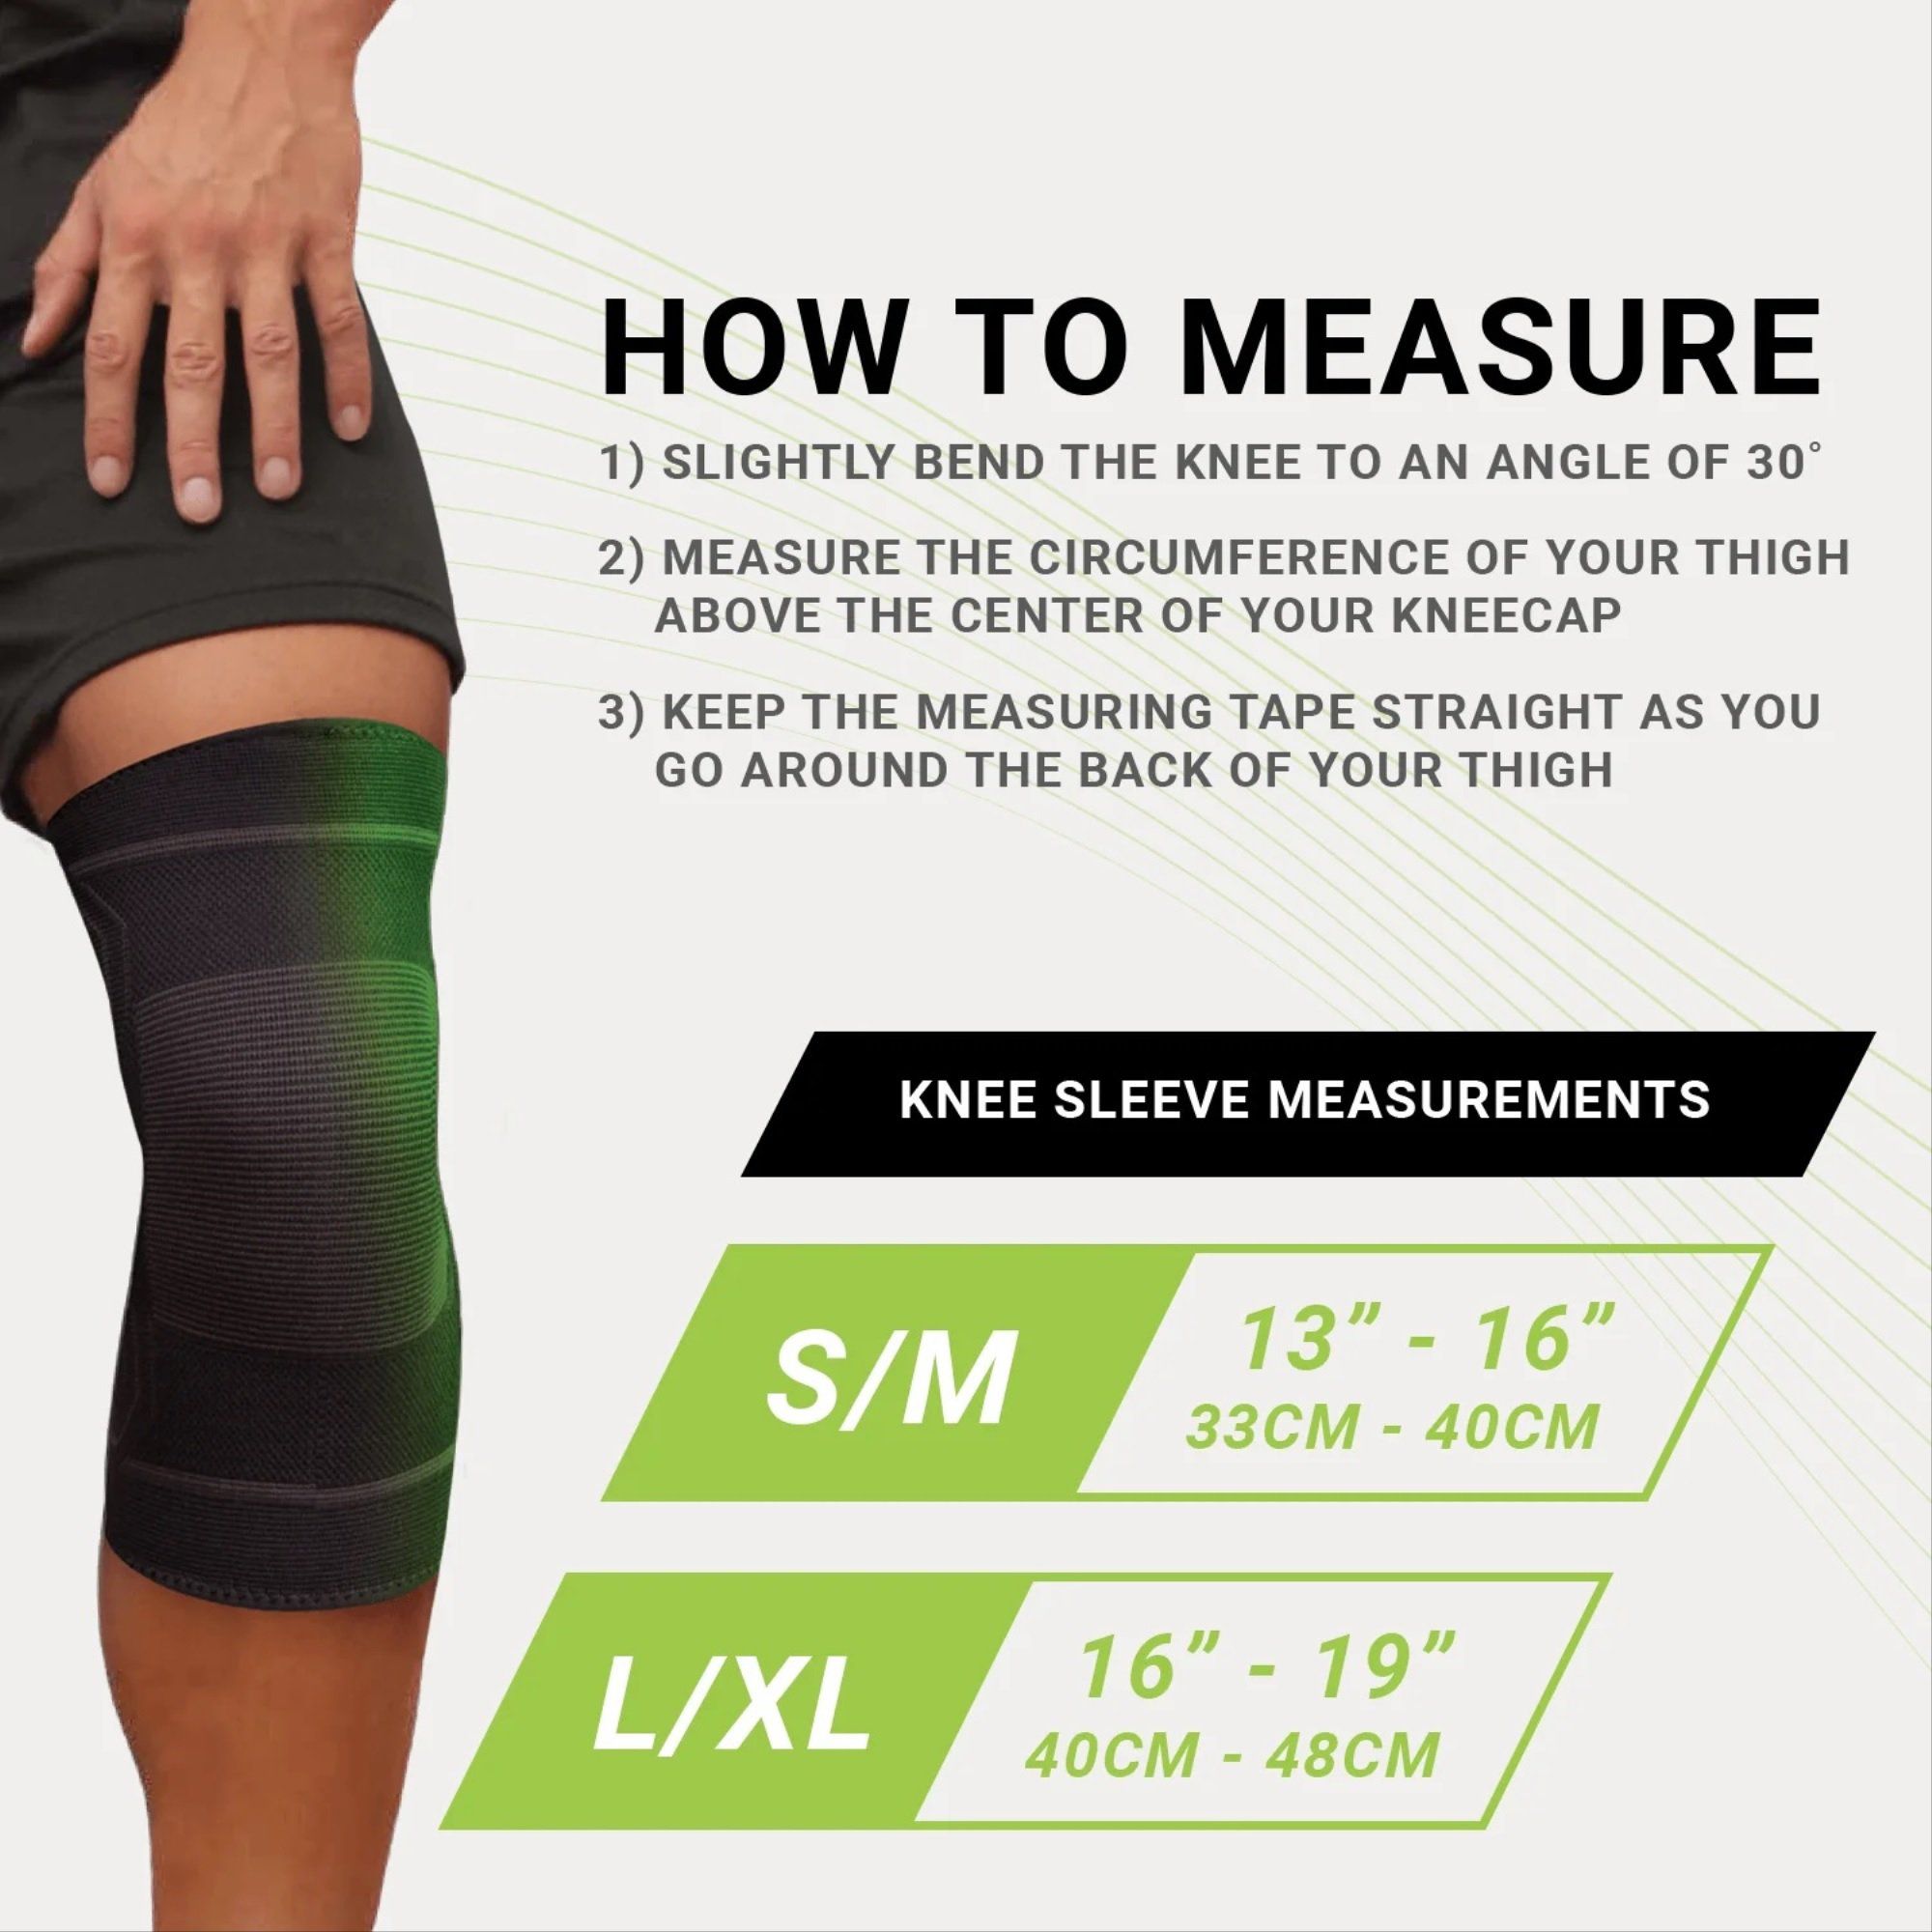 Green Drop Infused Recovery Compression Knee Sleeve, Black - Small/Medium